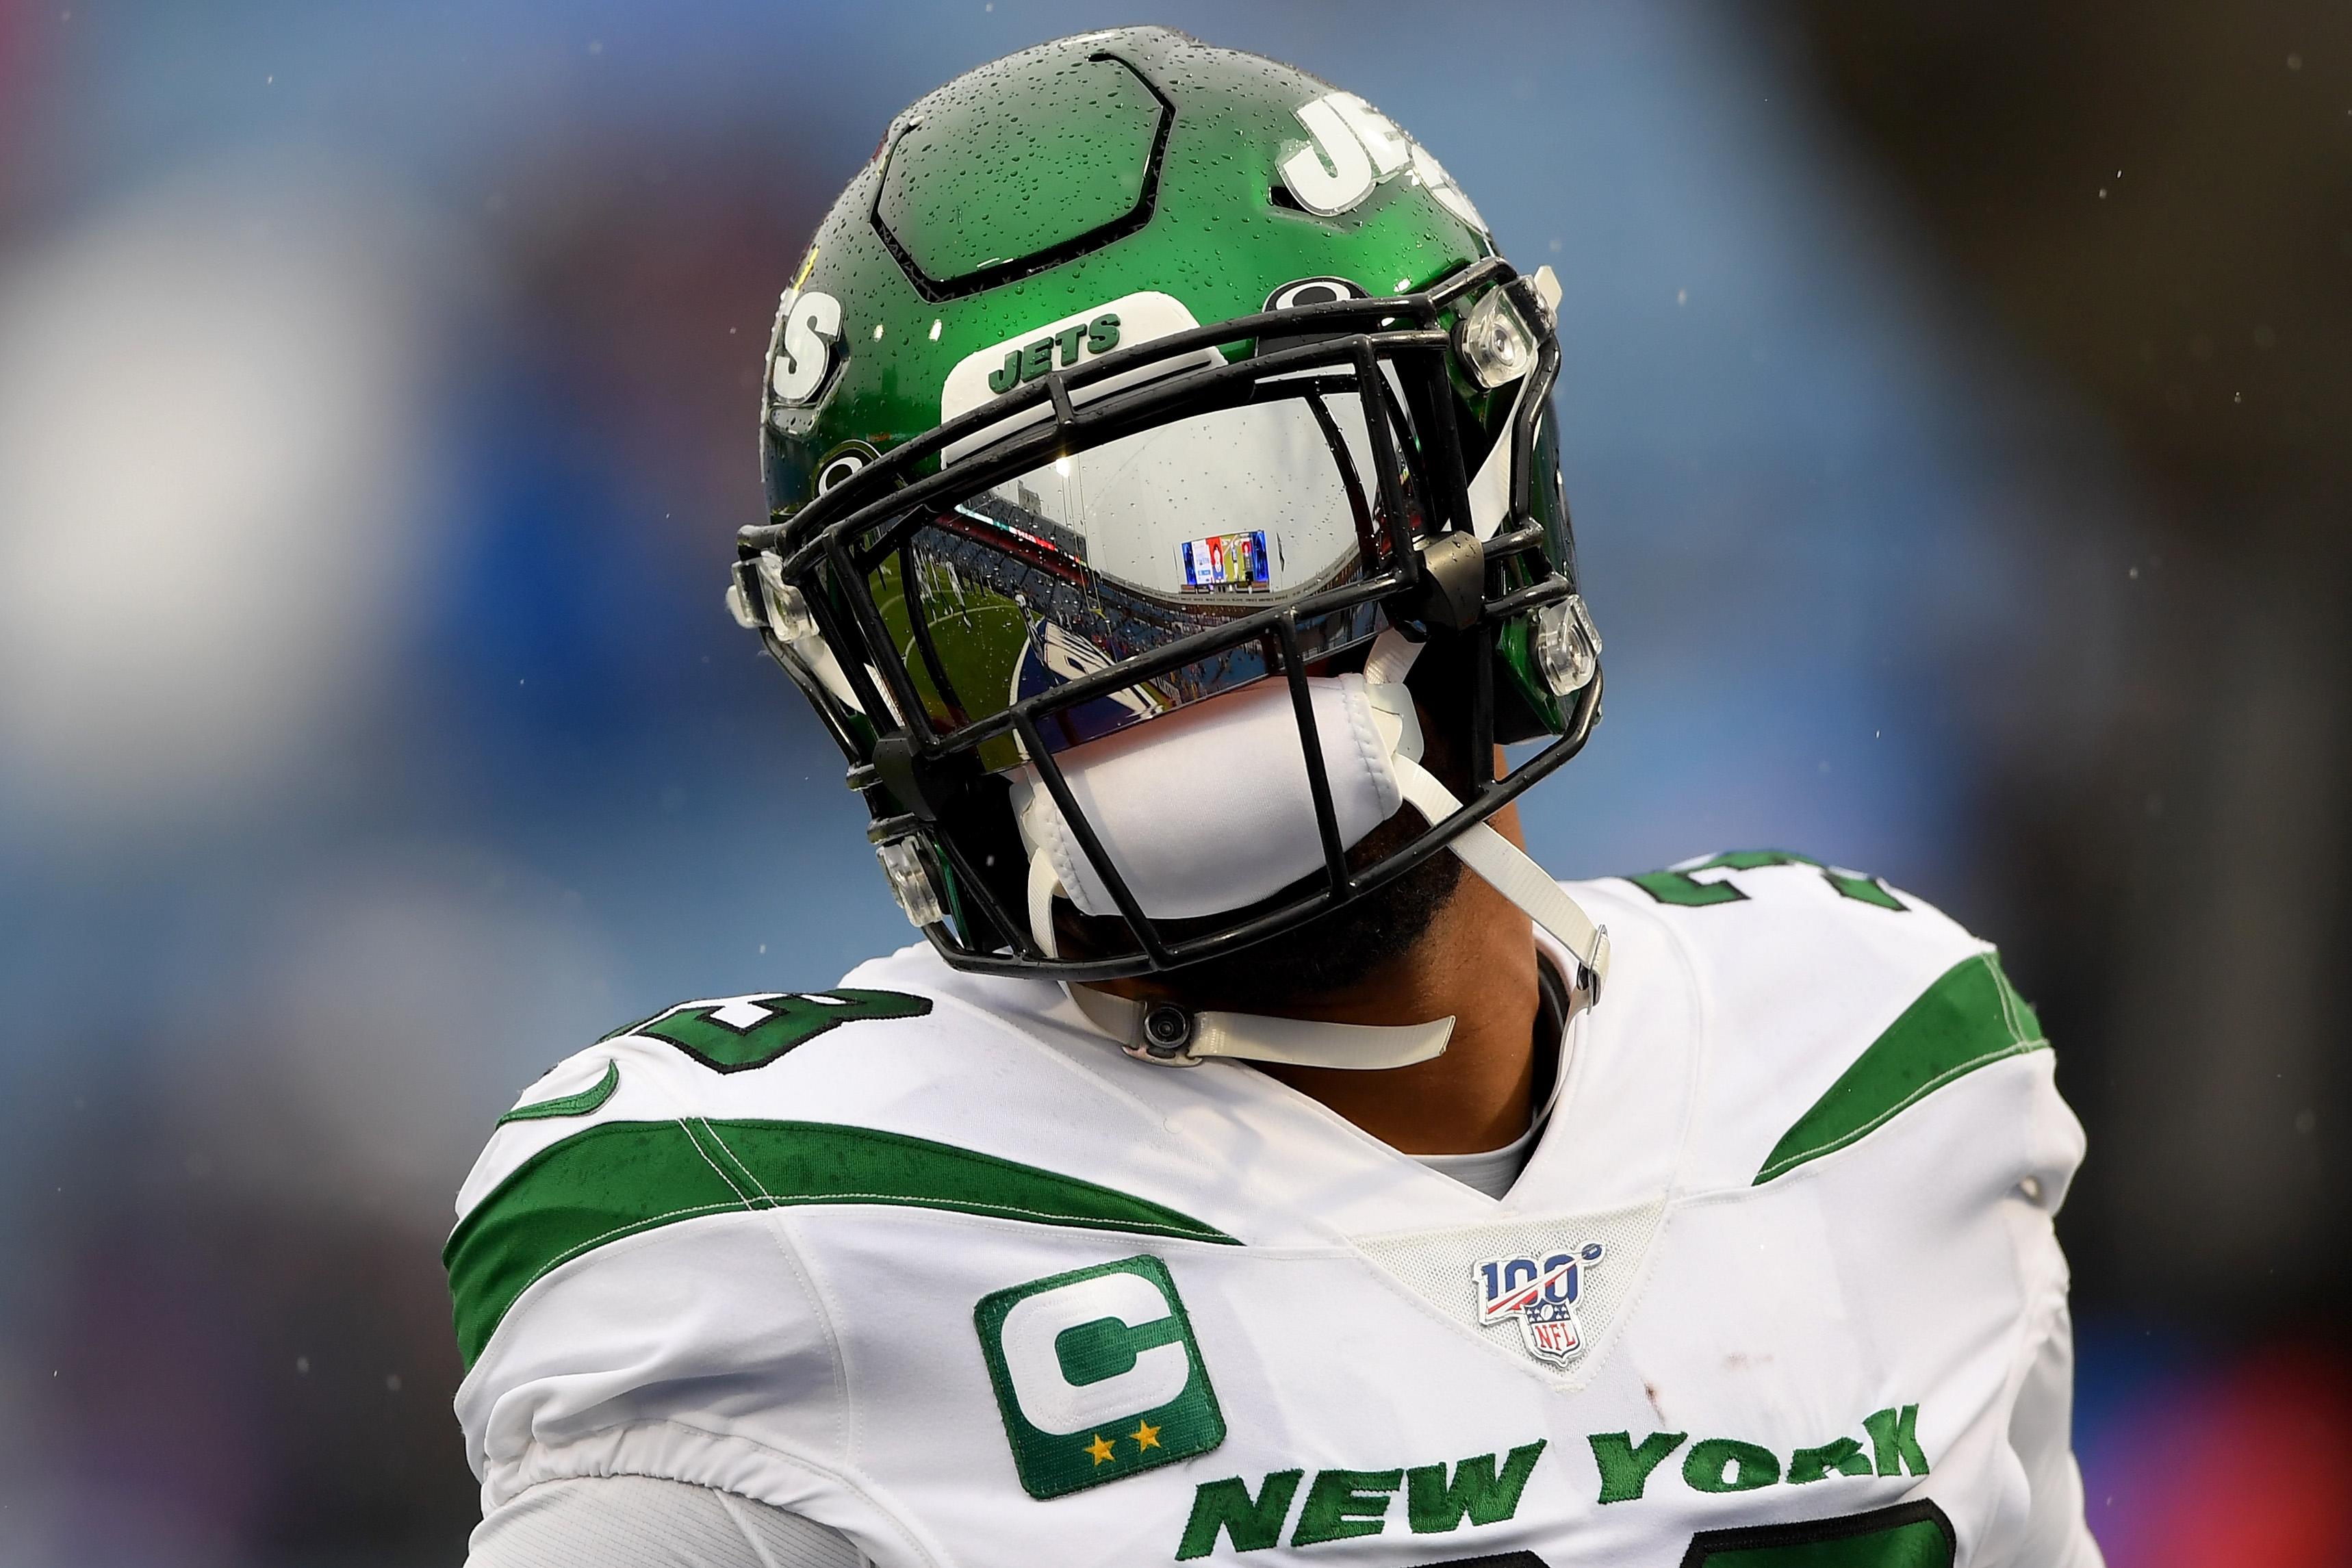 Dec 29, 2019; Orchard Park, New York, USA; New York Jets strong safety Jamal Adams (33) warms up prior to the game against the Buffalo Bills at New Era Field. Mandatory Credit: Rich Barnes-USA TODAY Sports / Rich Barnes